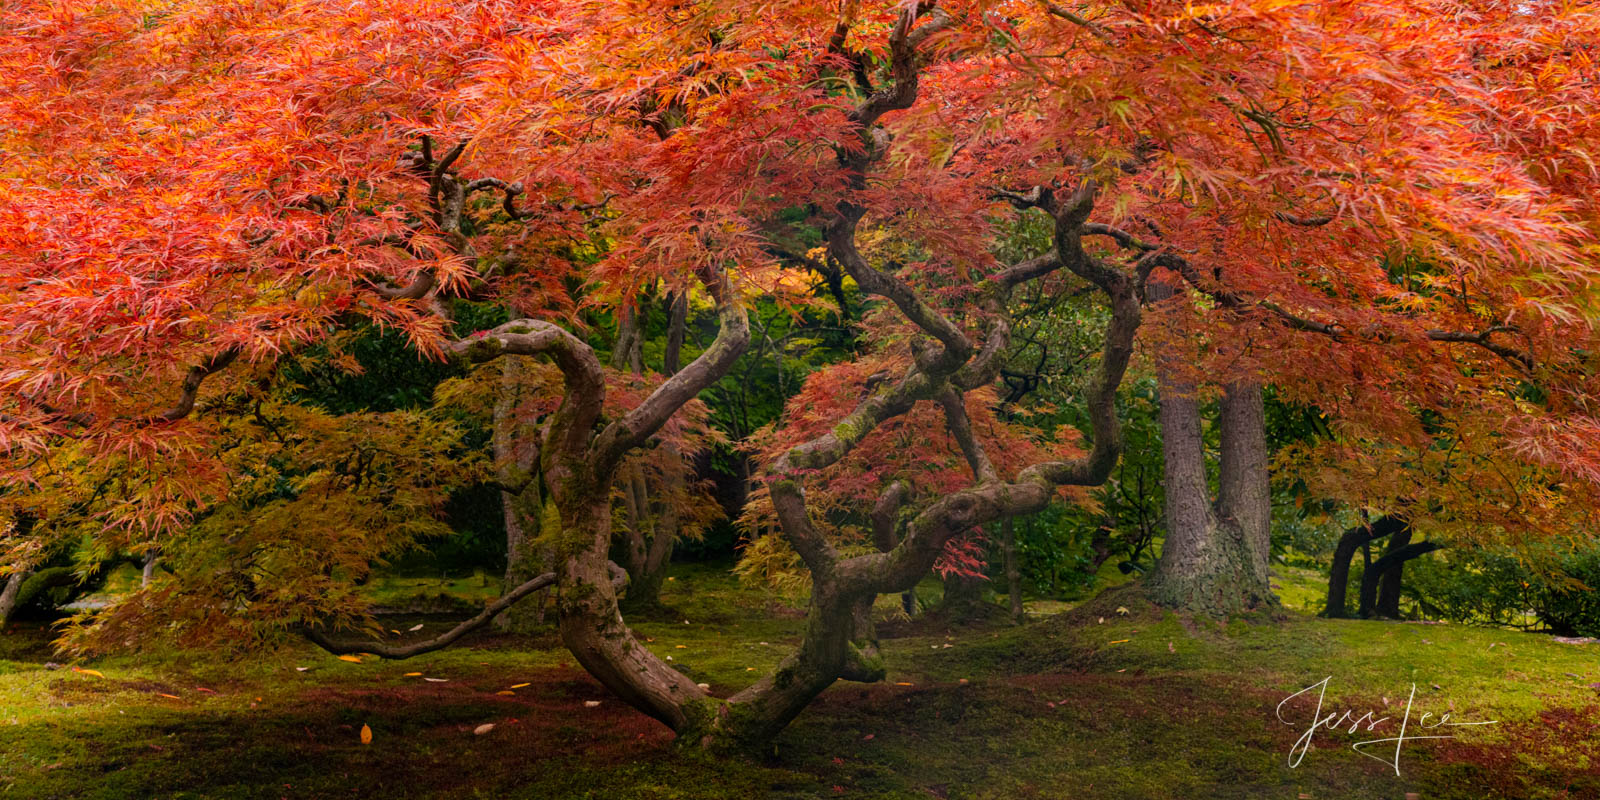 A limited edition fine art photographic print of 50 archival Museum Quality artworks of this beautiful Japanese Maple.